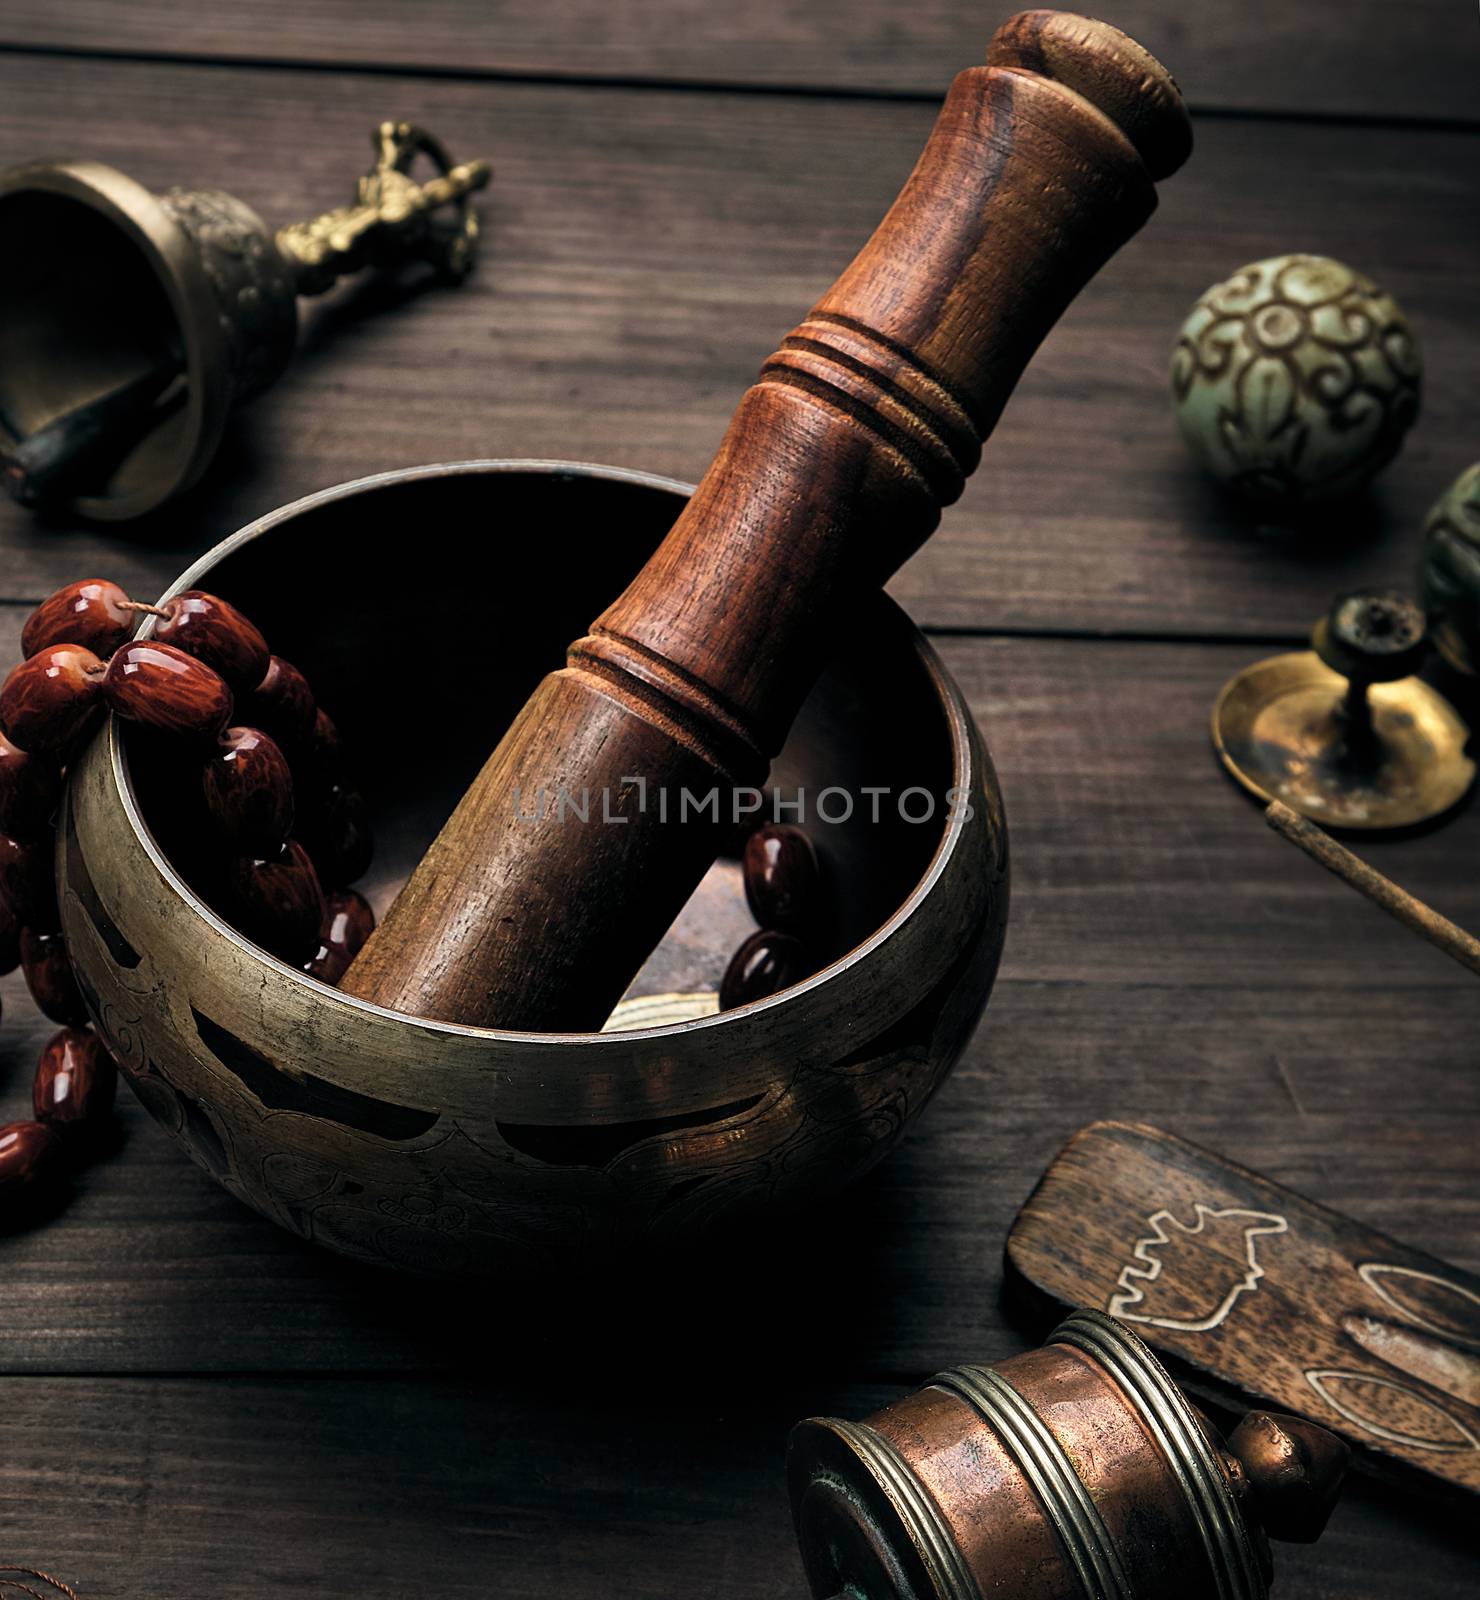 copper singing bowl and a wooden stick on a brown table  by ndanko